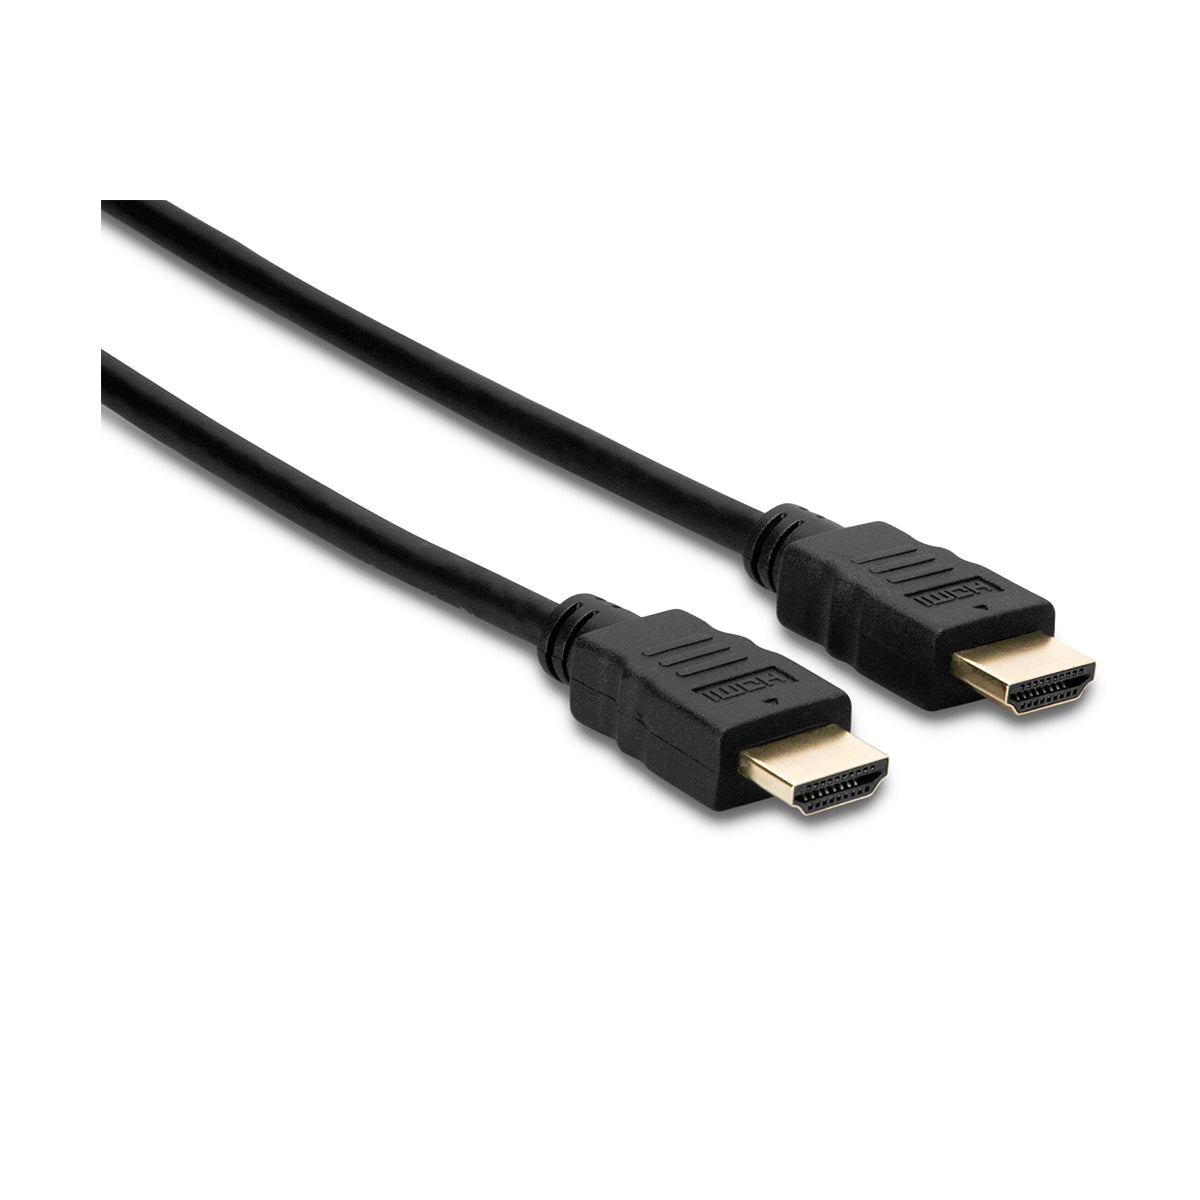 Hosa High Speed HDMI Cable - HDMI to HDMI, 6 ft